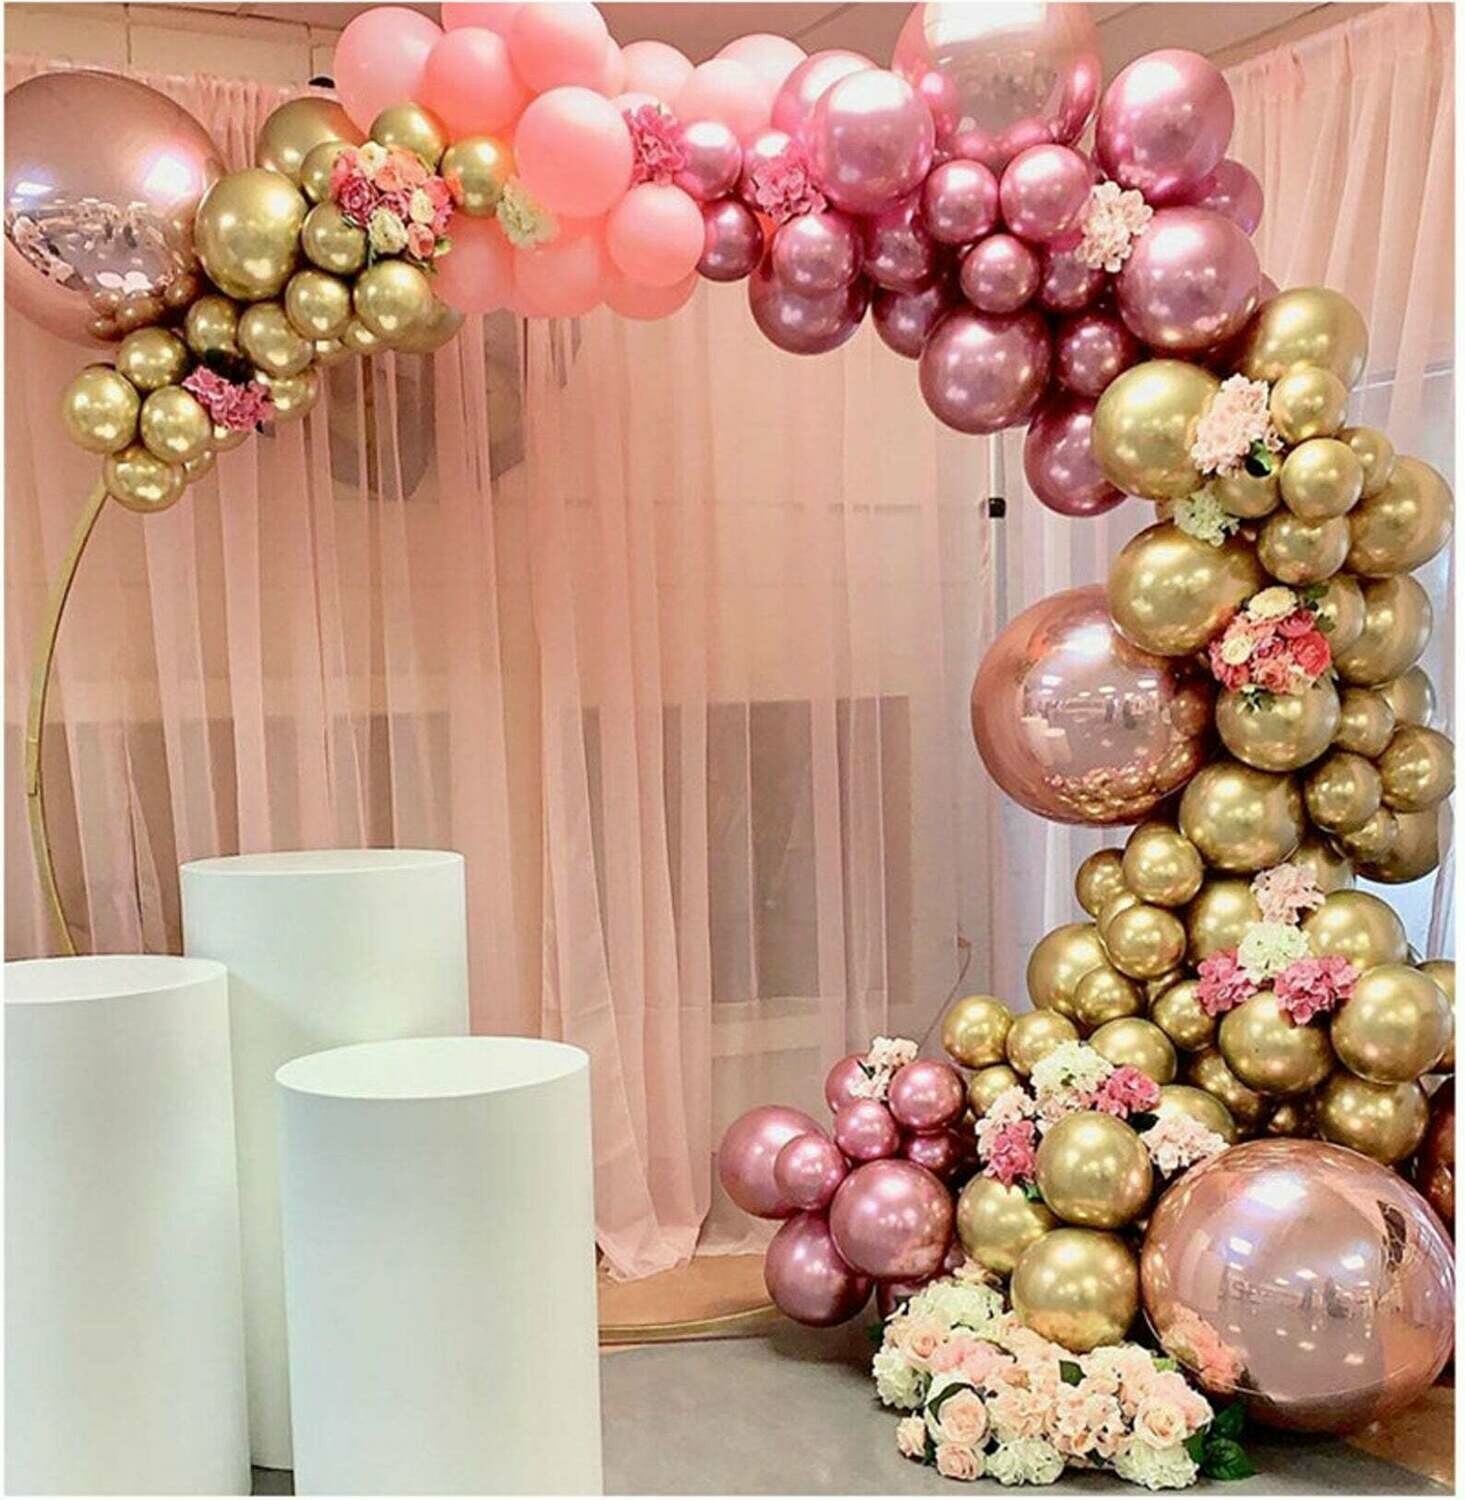 134 pcs Chrome Gold Rose Pastel Baby Pink Balloons Garland Arch Kit 4D Rose Balloon For Birthday Wedding Baby Shower Party Decor